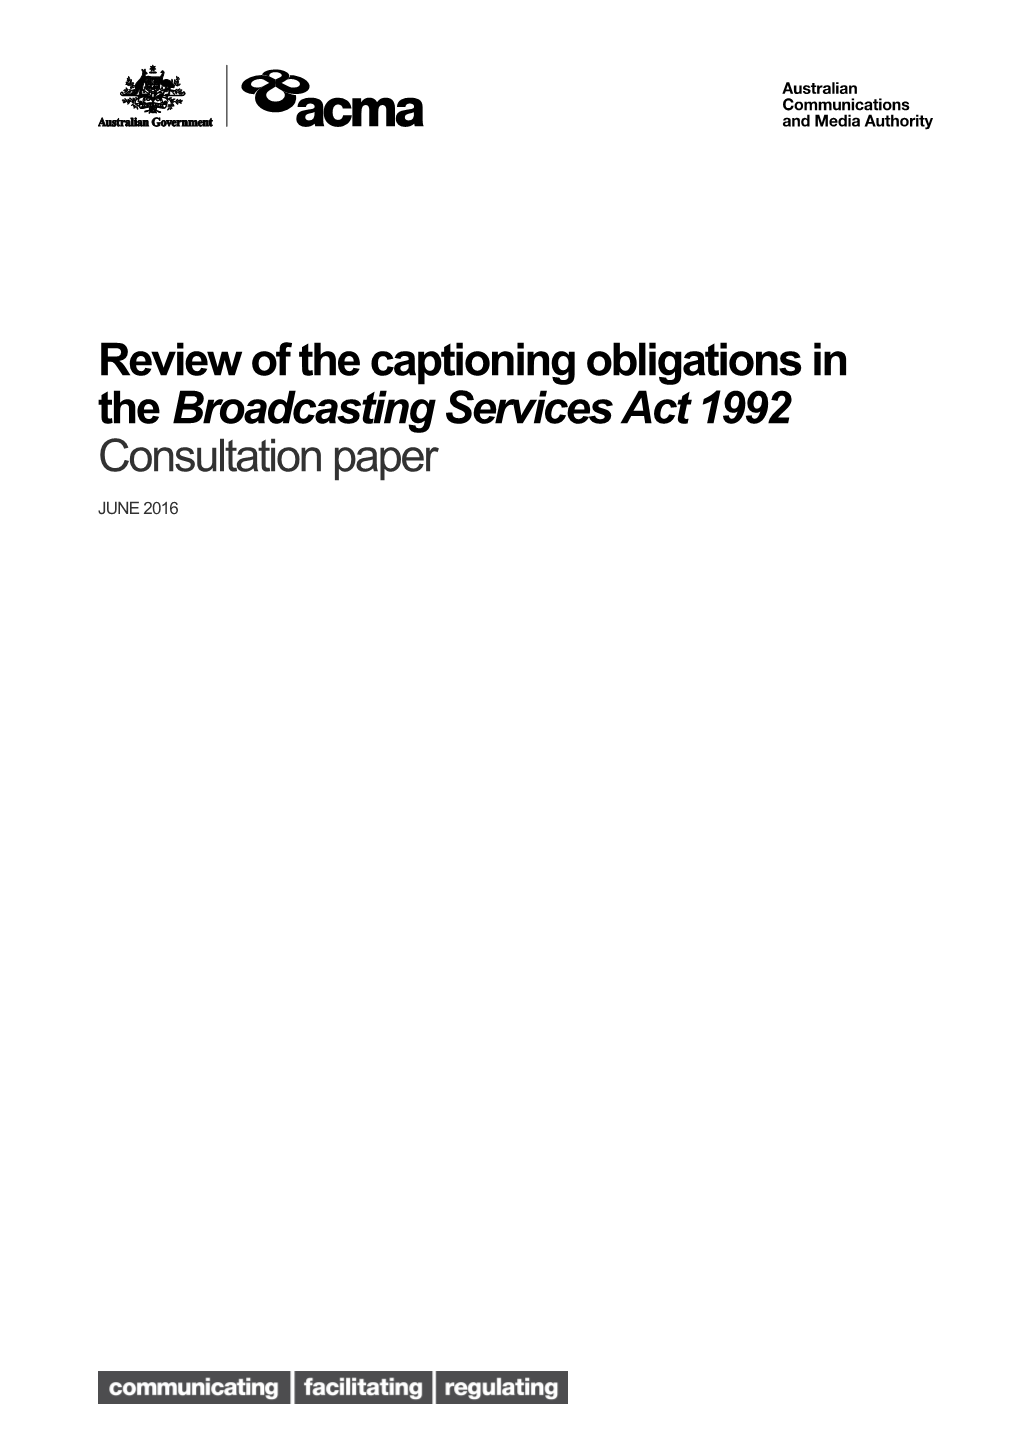 Review of the Captioning Obligations in the Broadcasting Services Act 1992